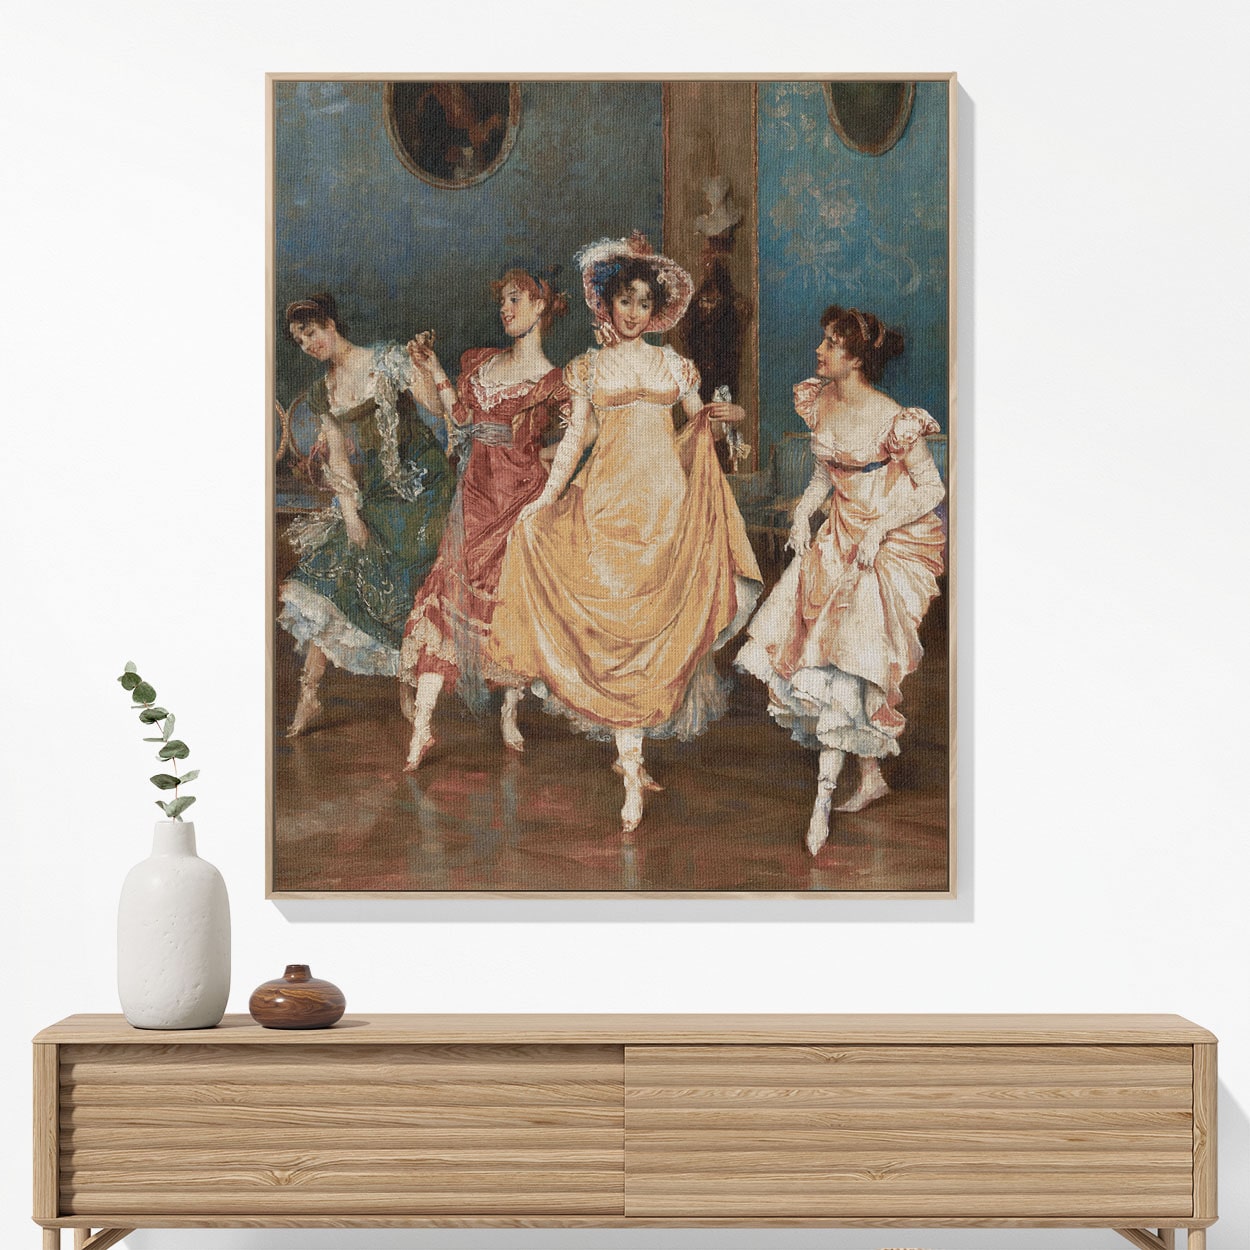 Victorian Girls Dancing Woven Blanket Woven Blanket Hanging on a Wall as Framed Wall Art